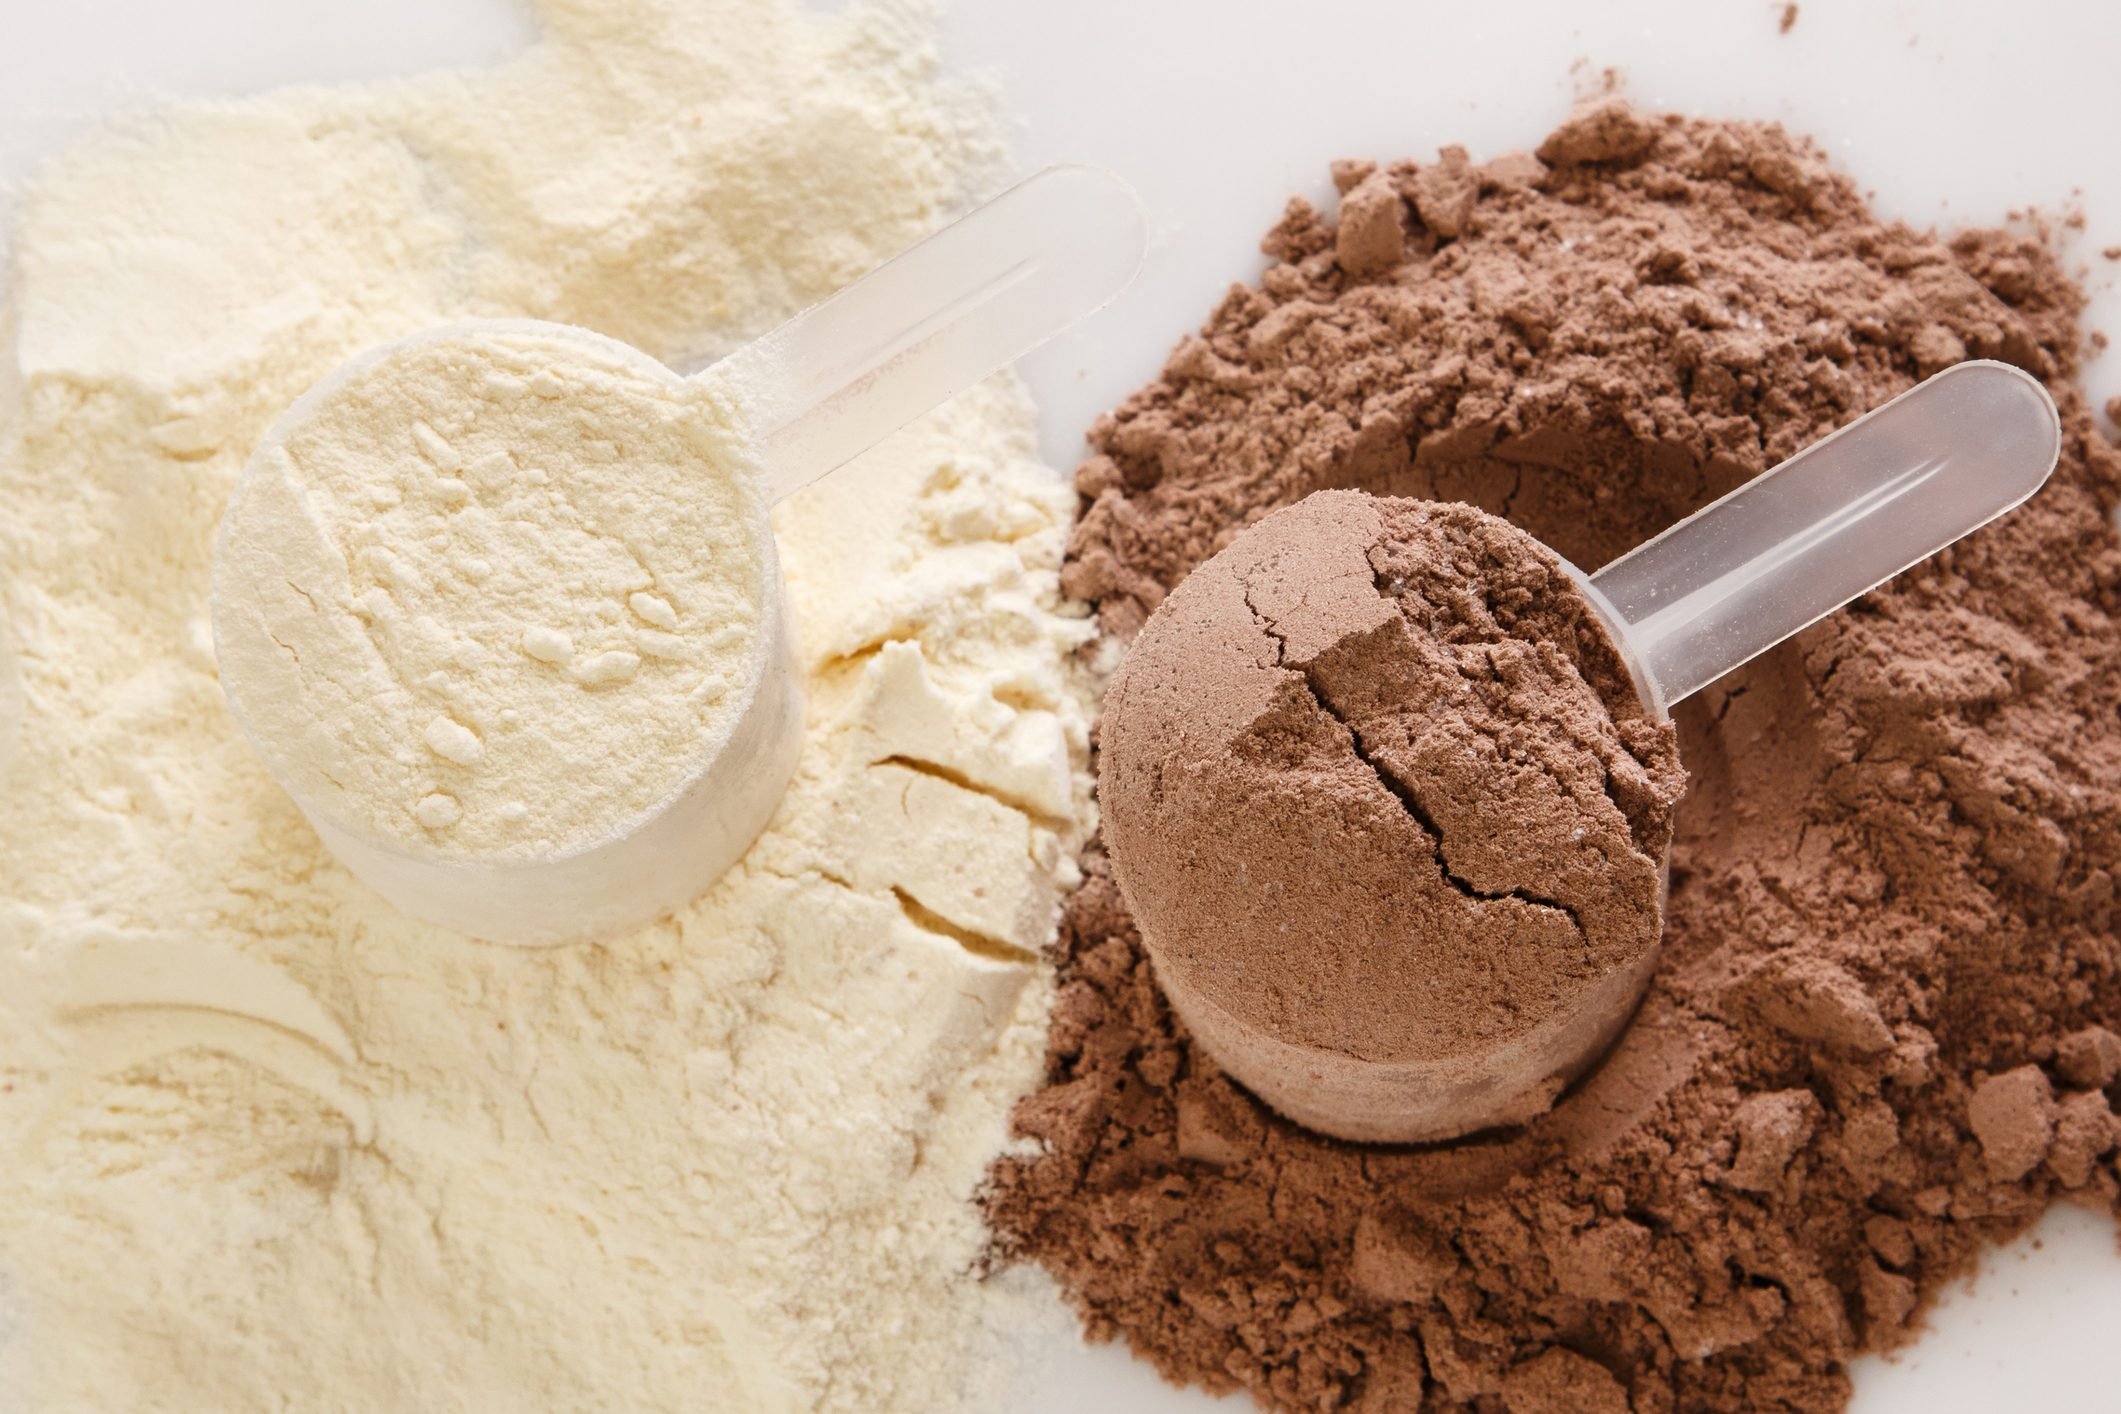 chocolate and vanilla protein powder in scoops